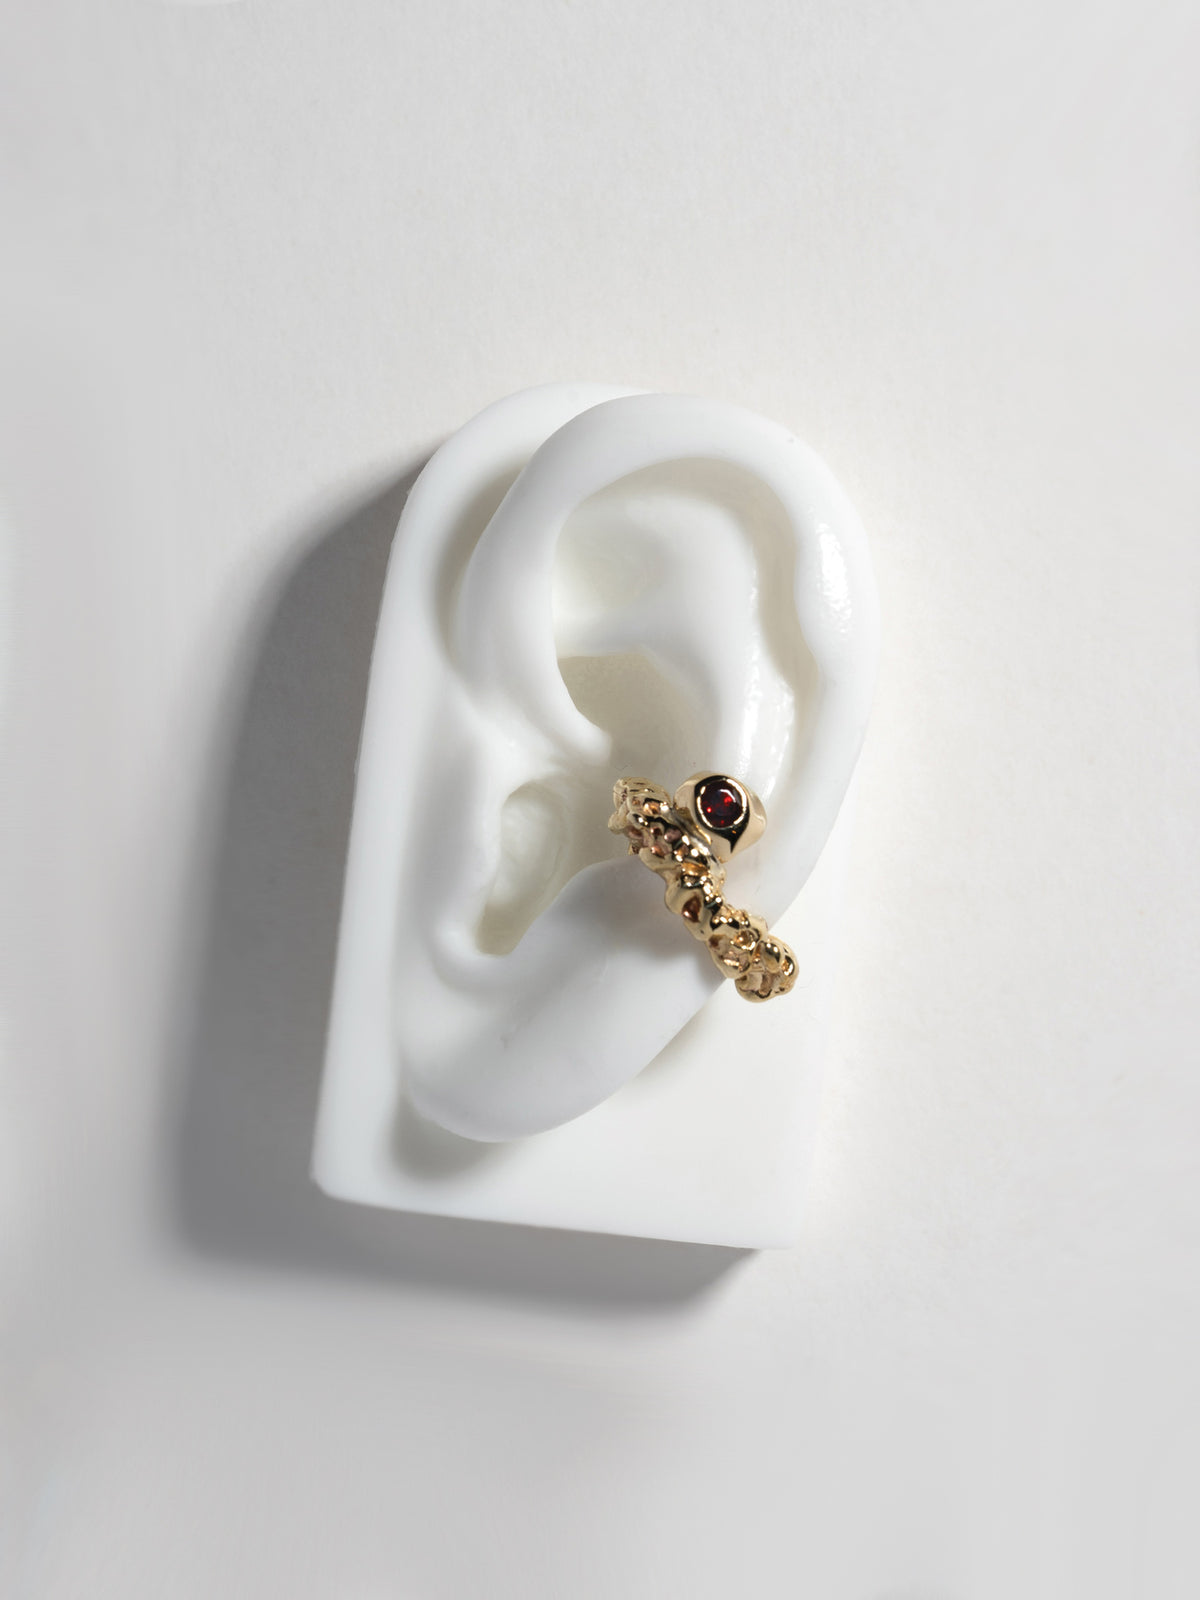 Product image of FARIS ROCA GEM Ear Cuff in gold-plated bronze with garnet, shown on white, silicone ear display